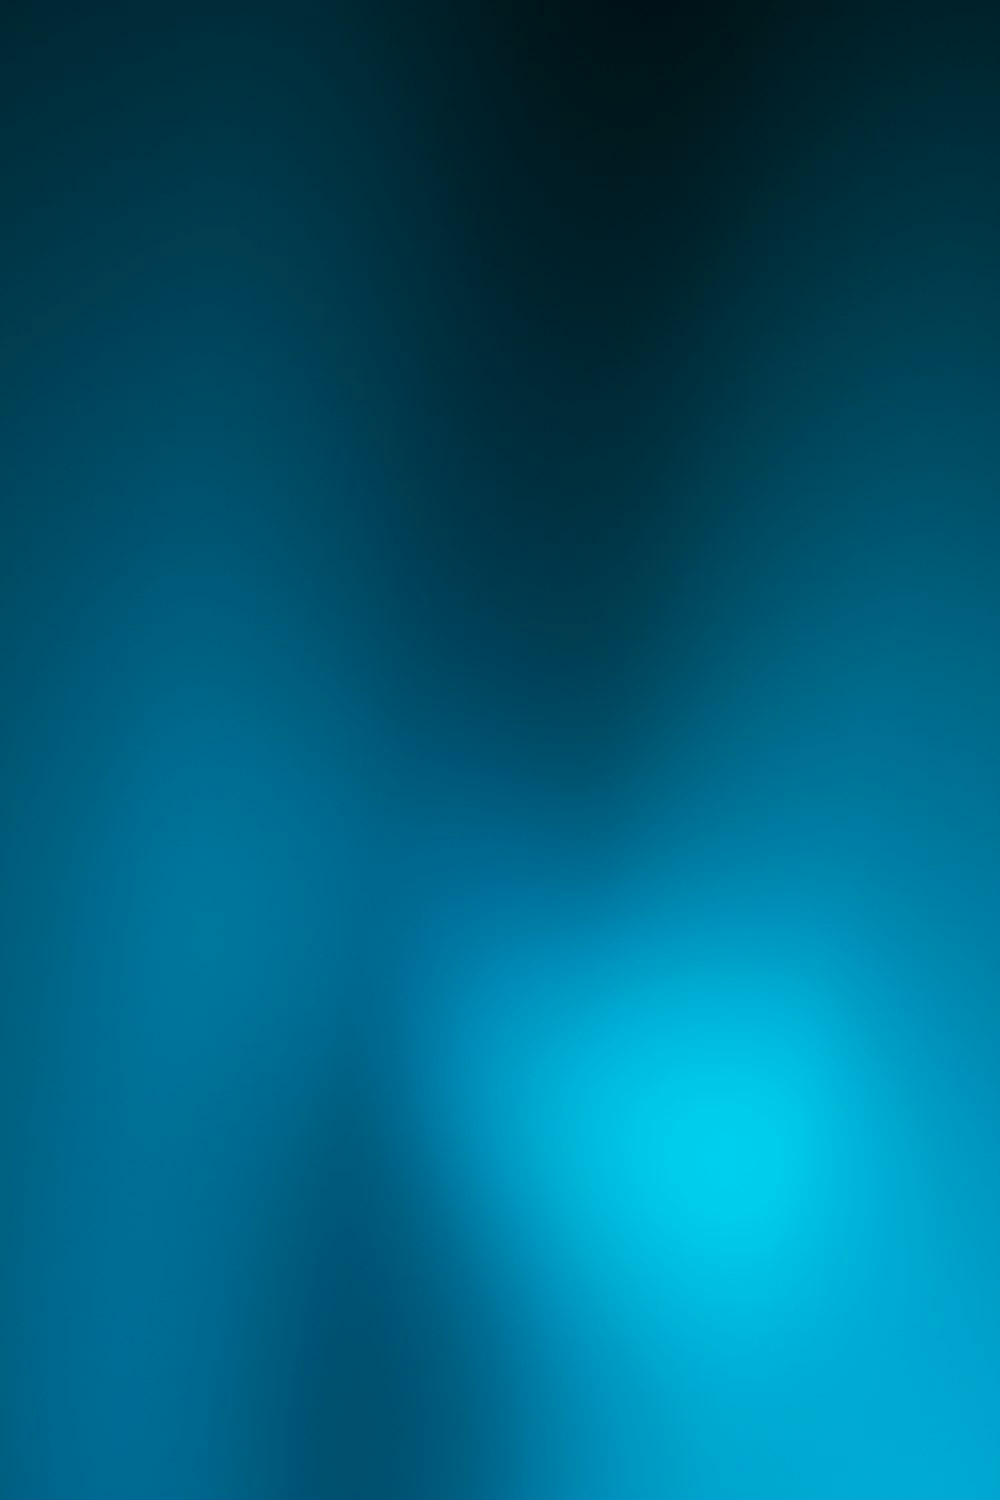 a blurry image of a blue background